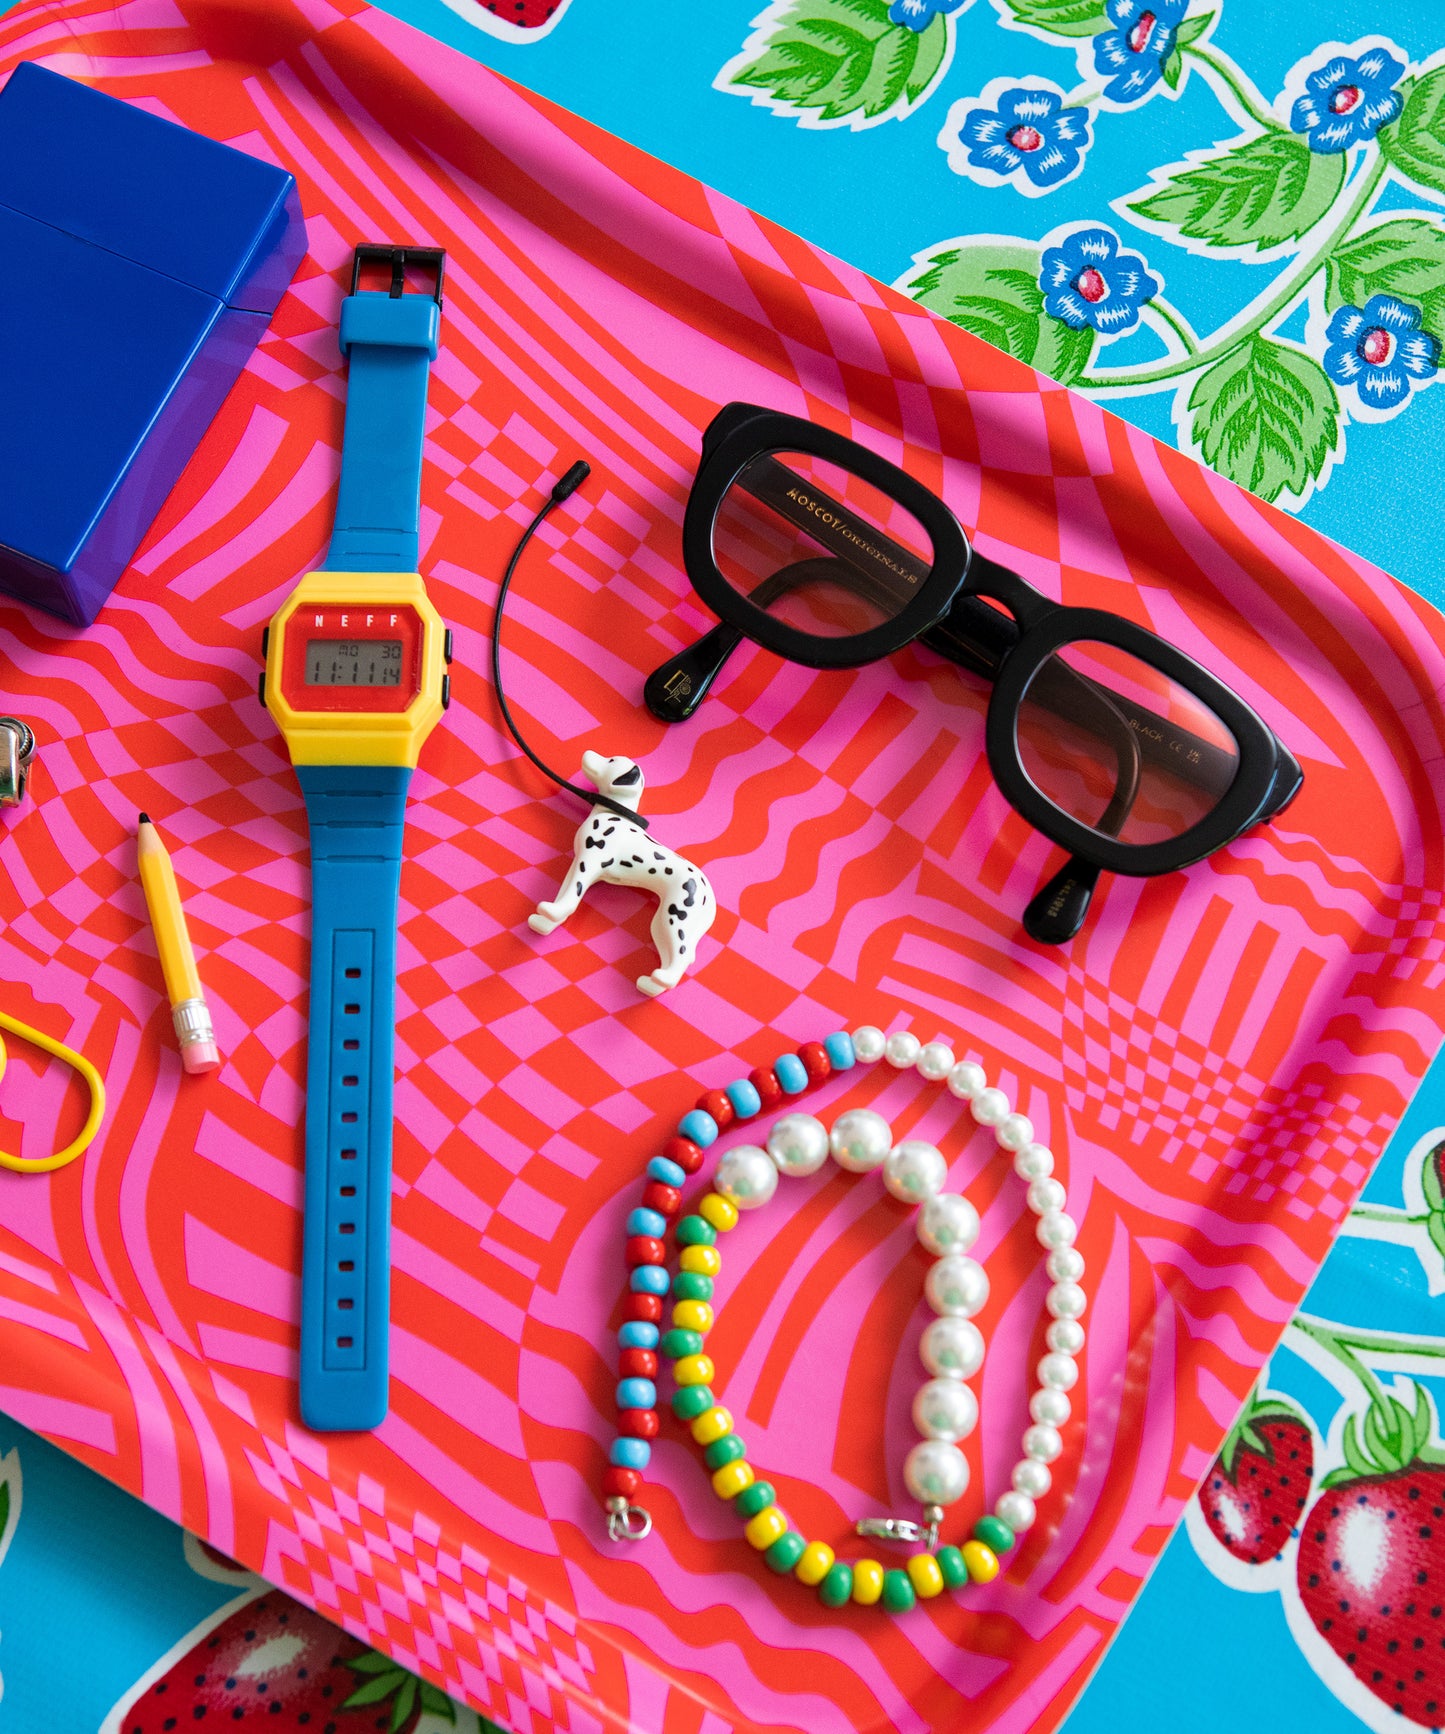 The Wiggles and Waves Tray with a watch, eye glasses, necklace, pencil and a dog accessory sitting on top.